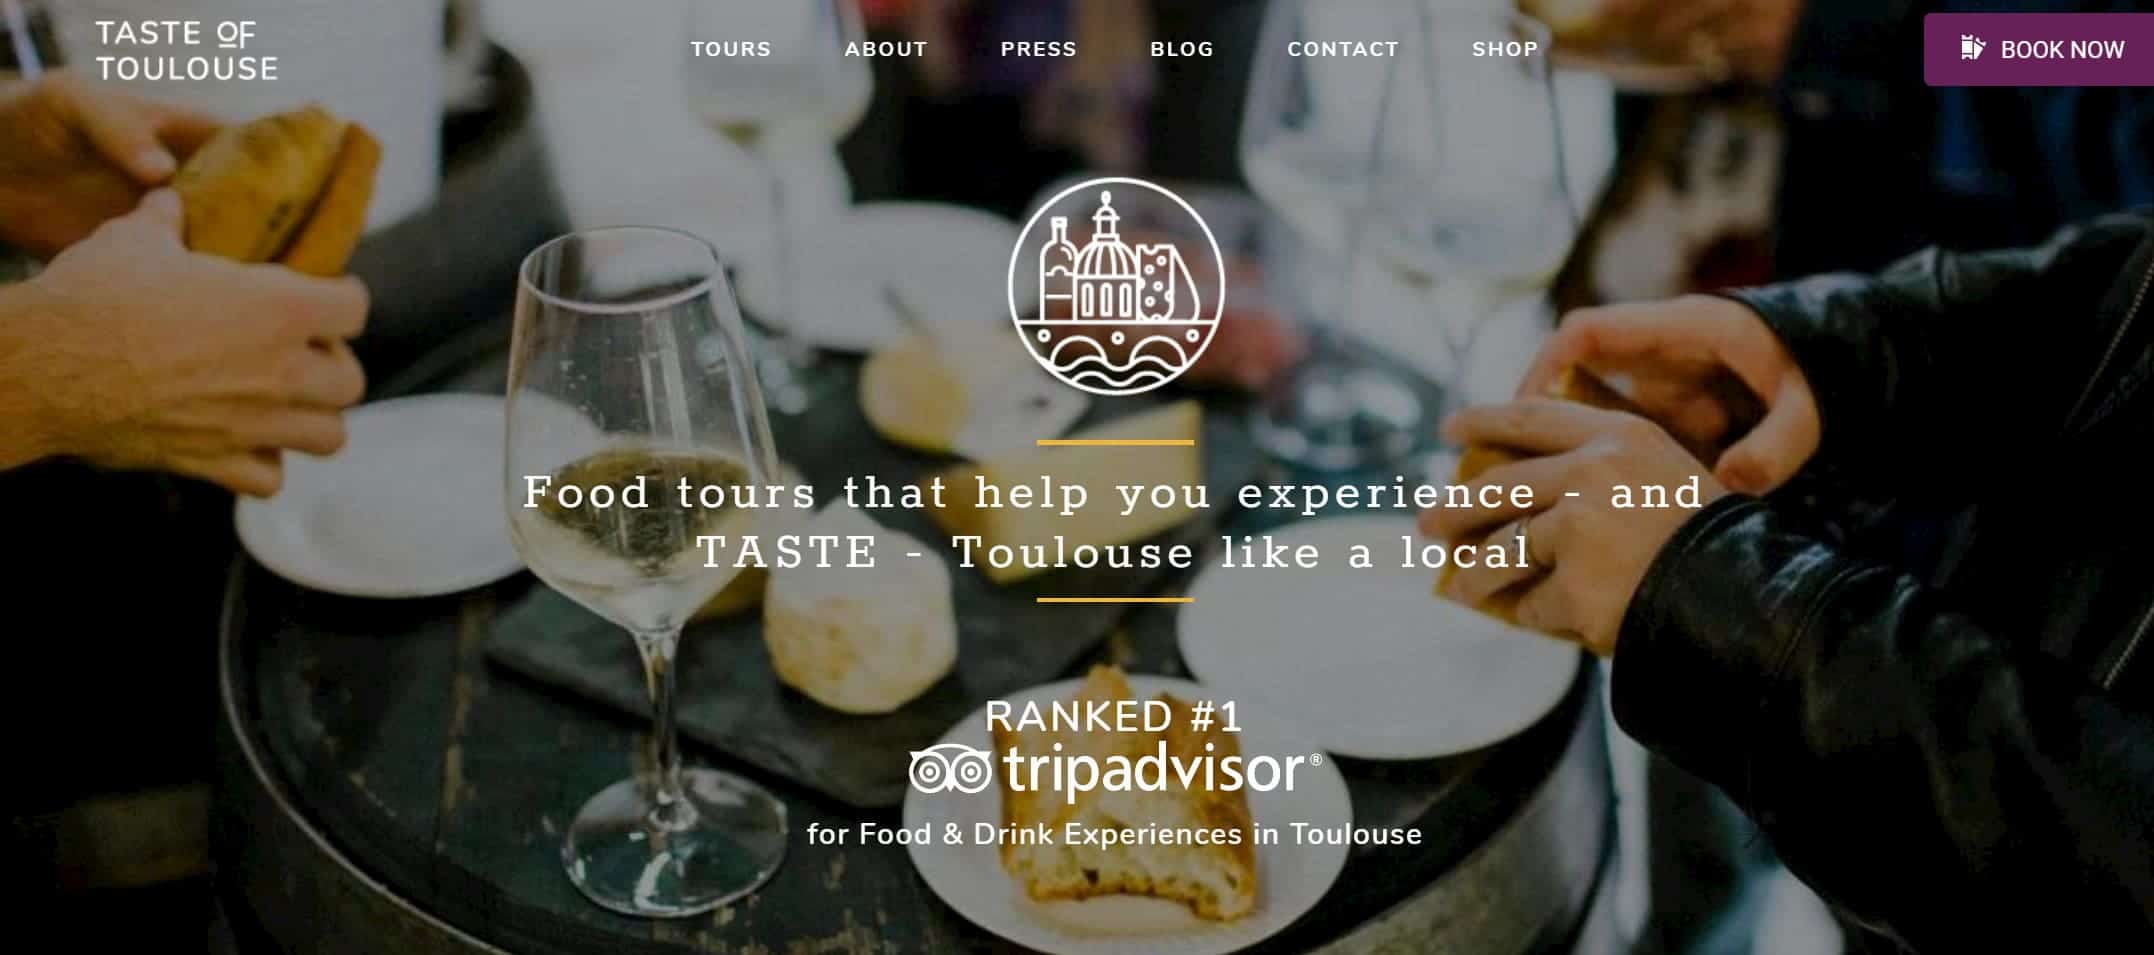 Website image of Taste of toulouse food tour